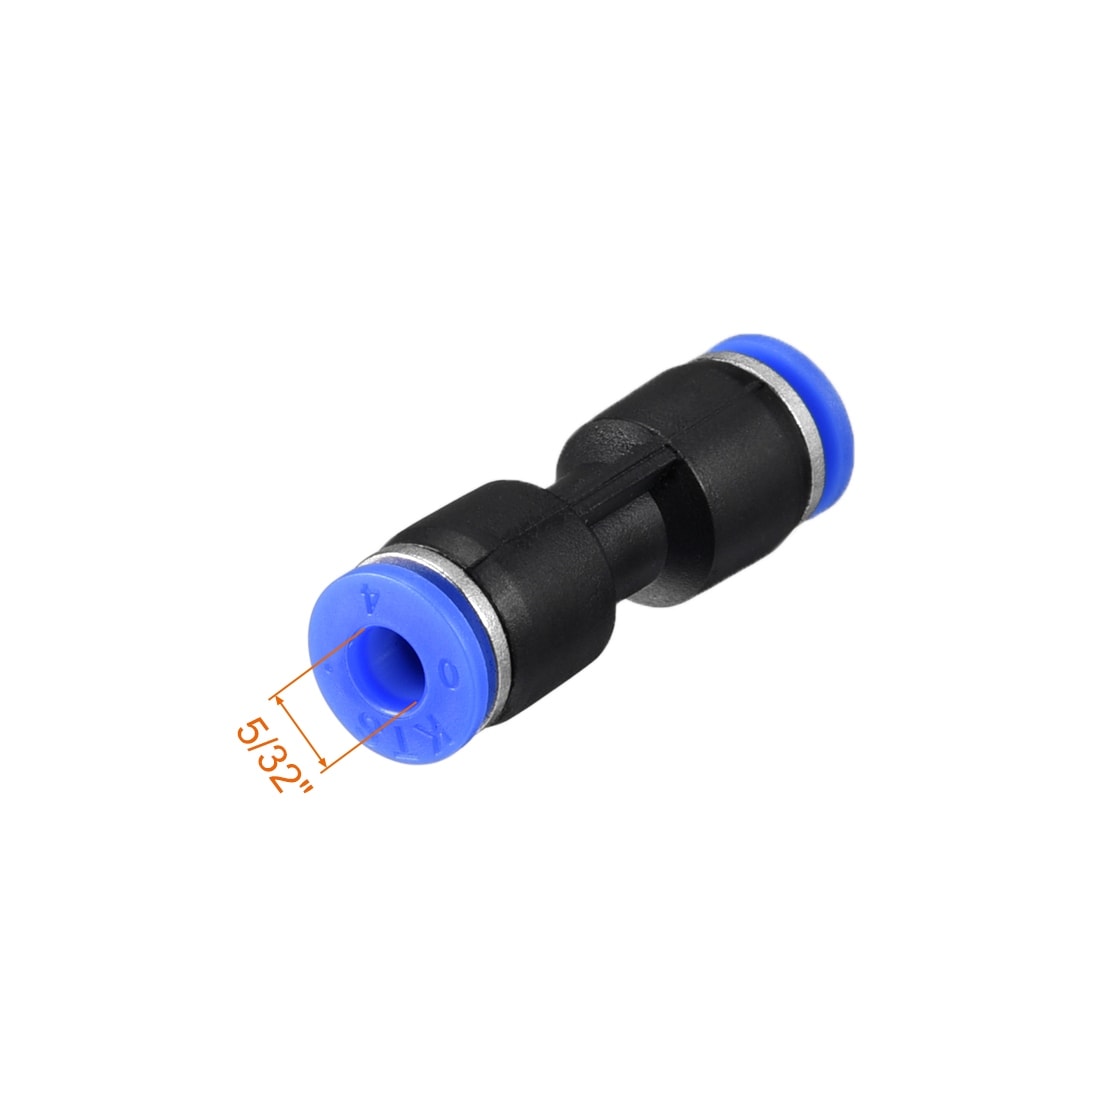 Plastic Tee Push to Connect 4mm or 5/32OD x 1/8 Tube Fittings Male Thread Push Lock Blue 2 Pieces 